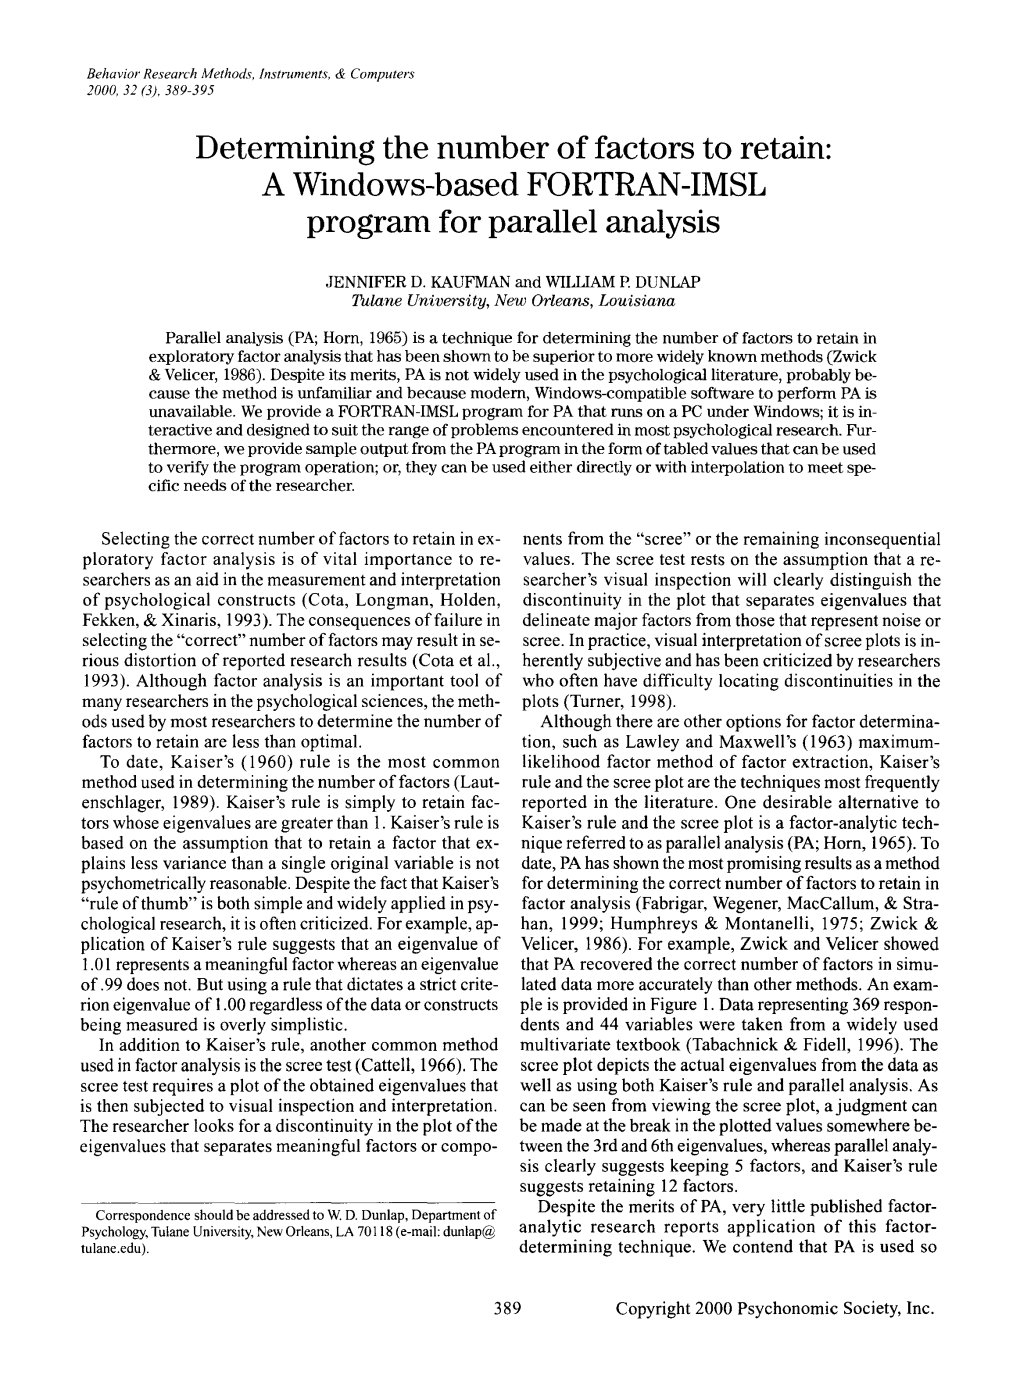 Determining the Number of Factors to Retain: Q Windows-Based FORTRAN-IMSL Program for Parallel Analysis